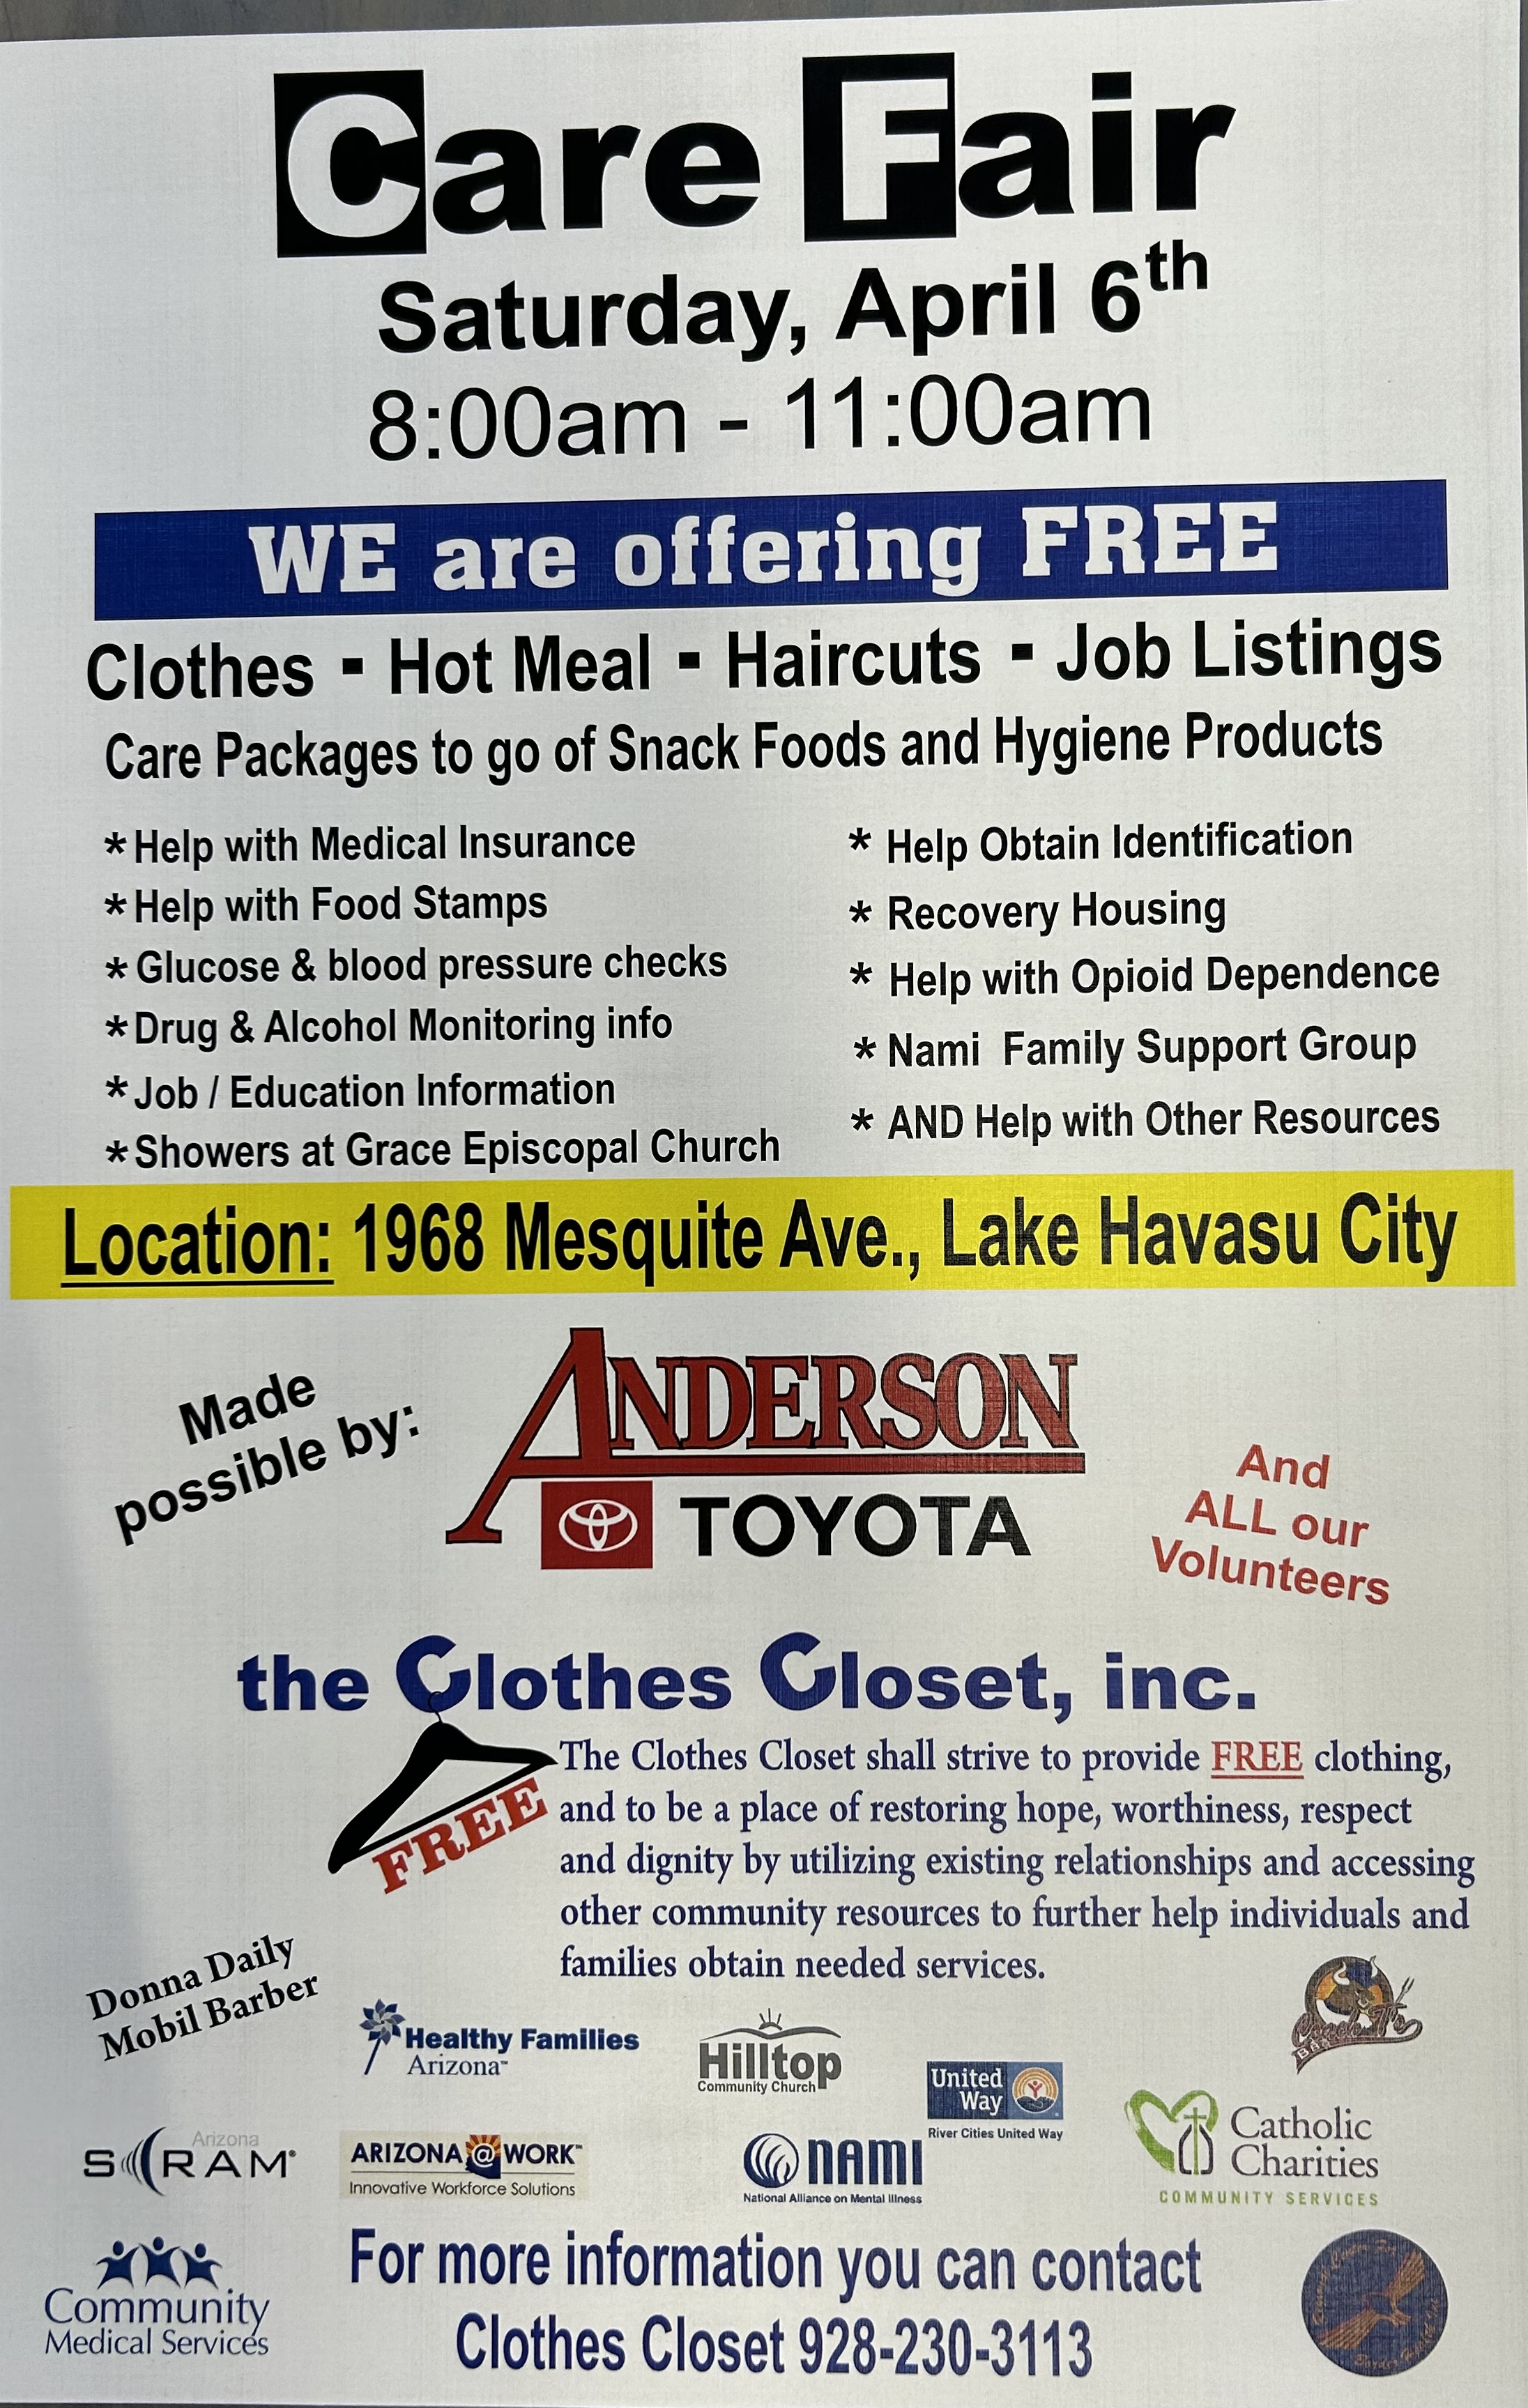 Spring Care Fair sponsored by Anderson Toyota